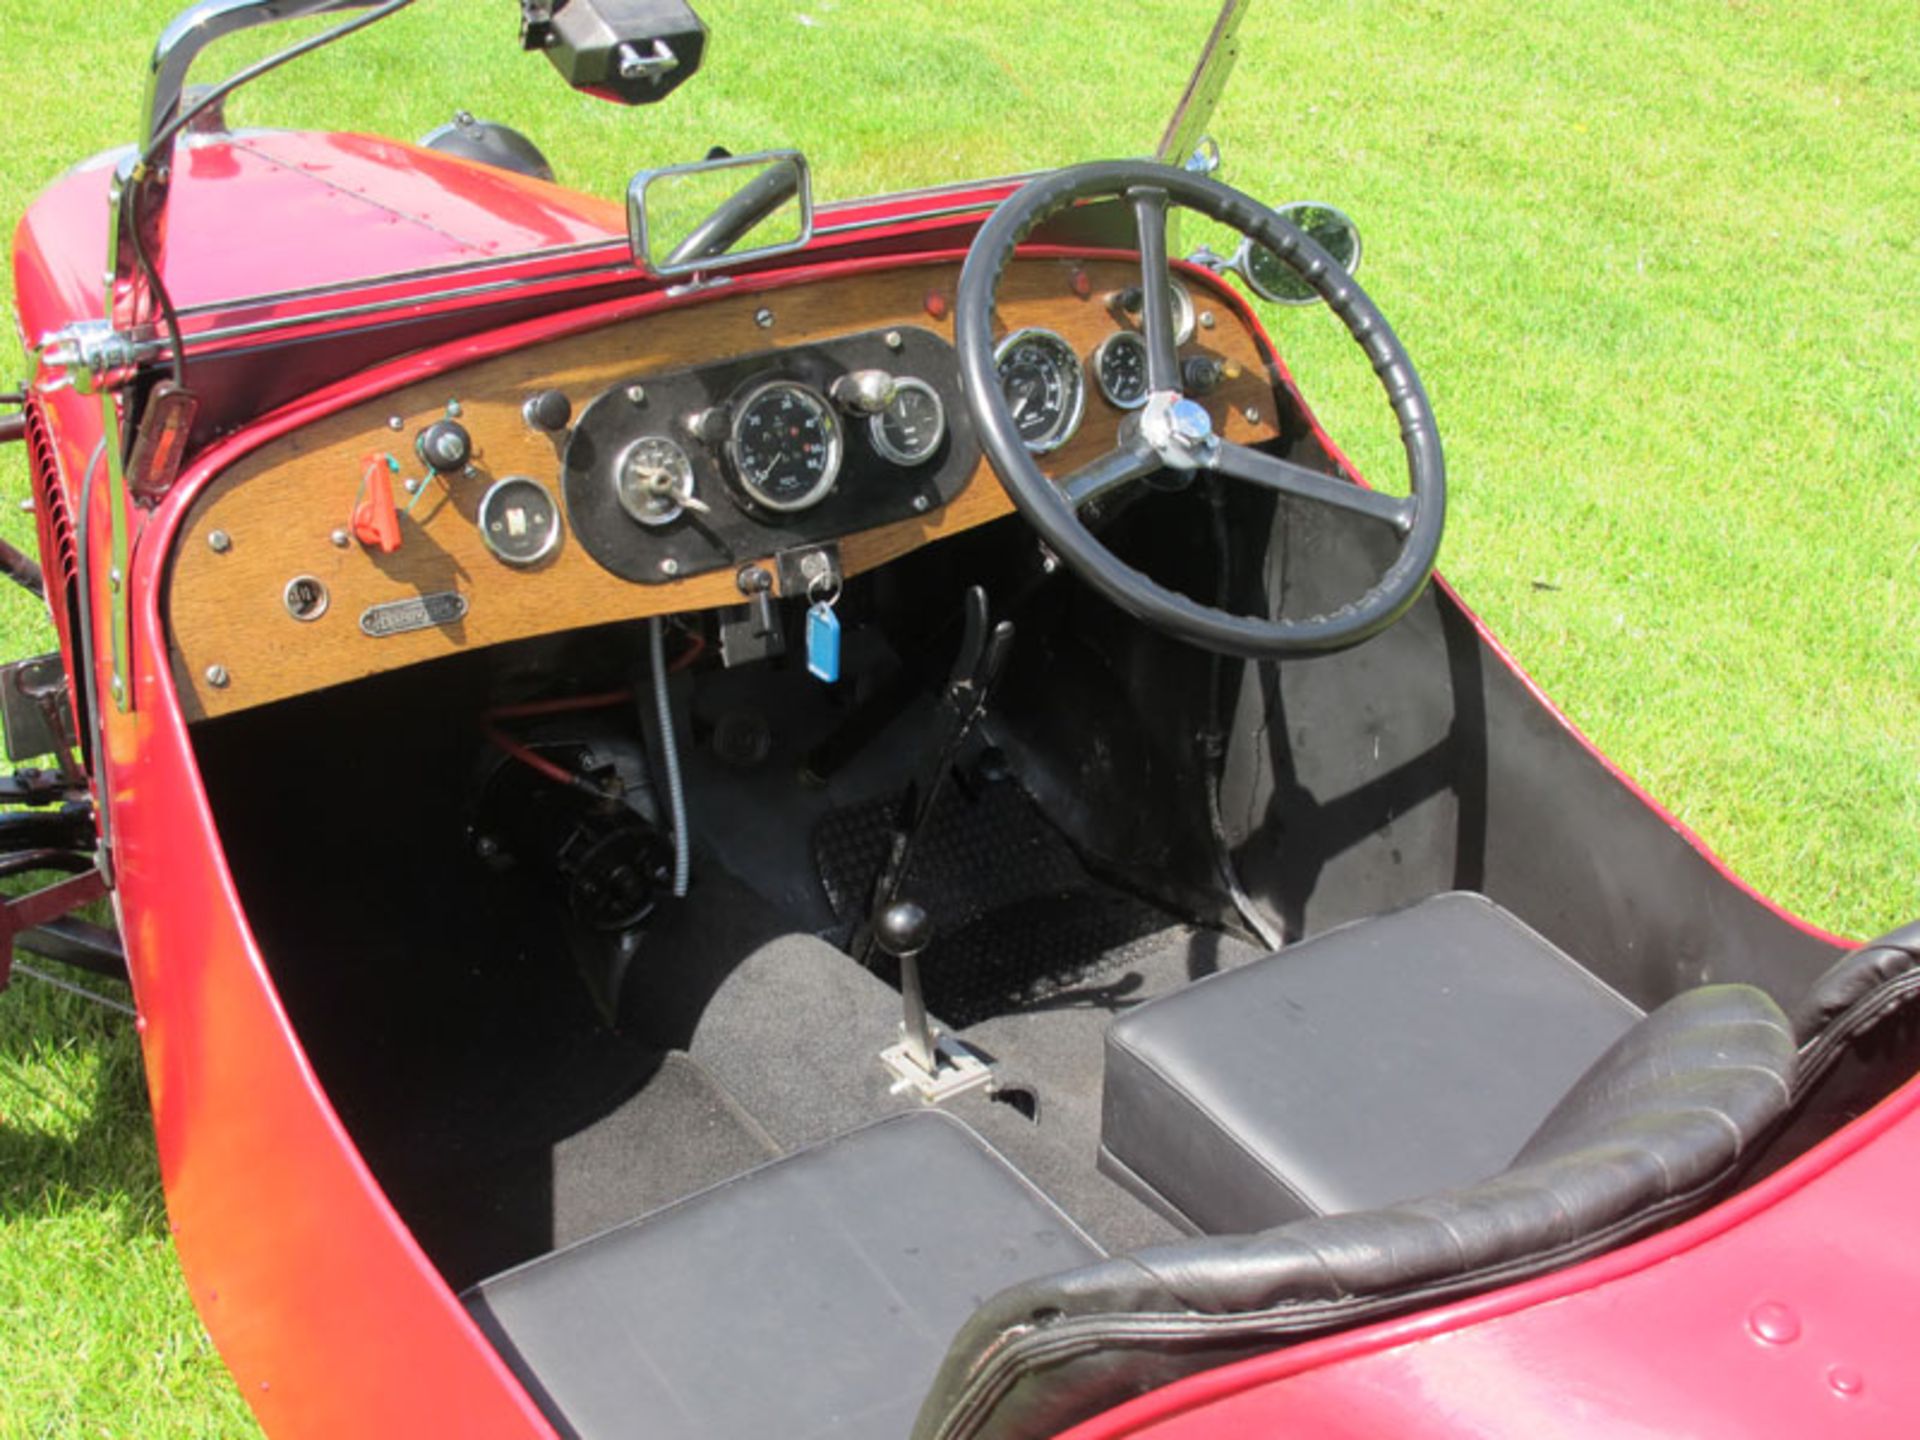 - Rare LR2/R5 model only available from July 1930 into 1931

- Refurbished with full-race engine and - Image 4 of 11